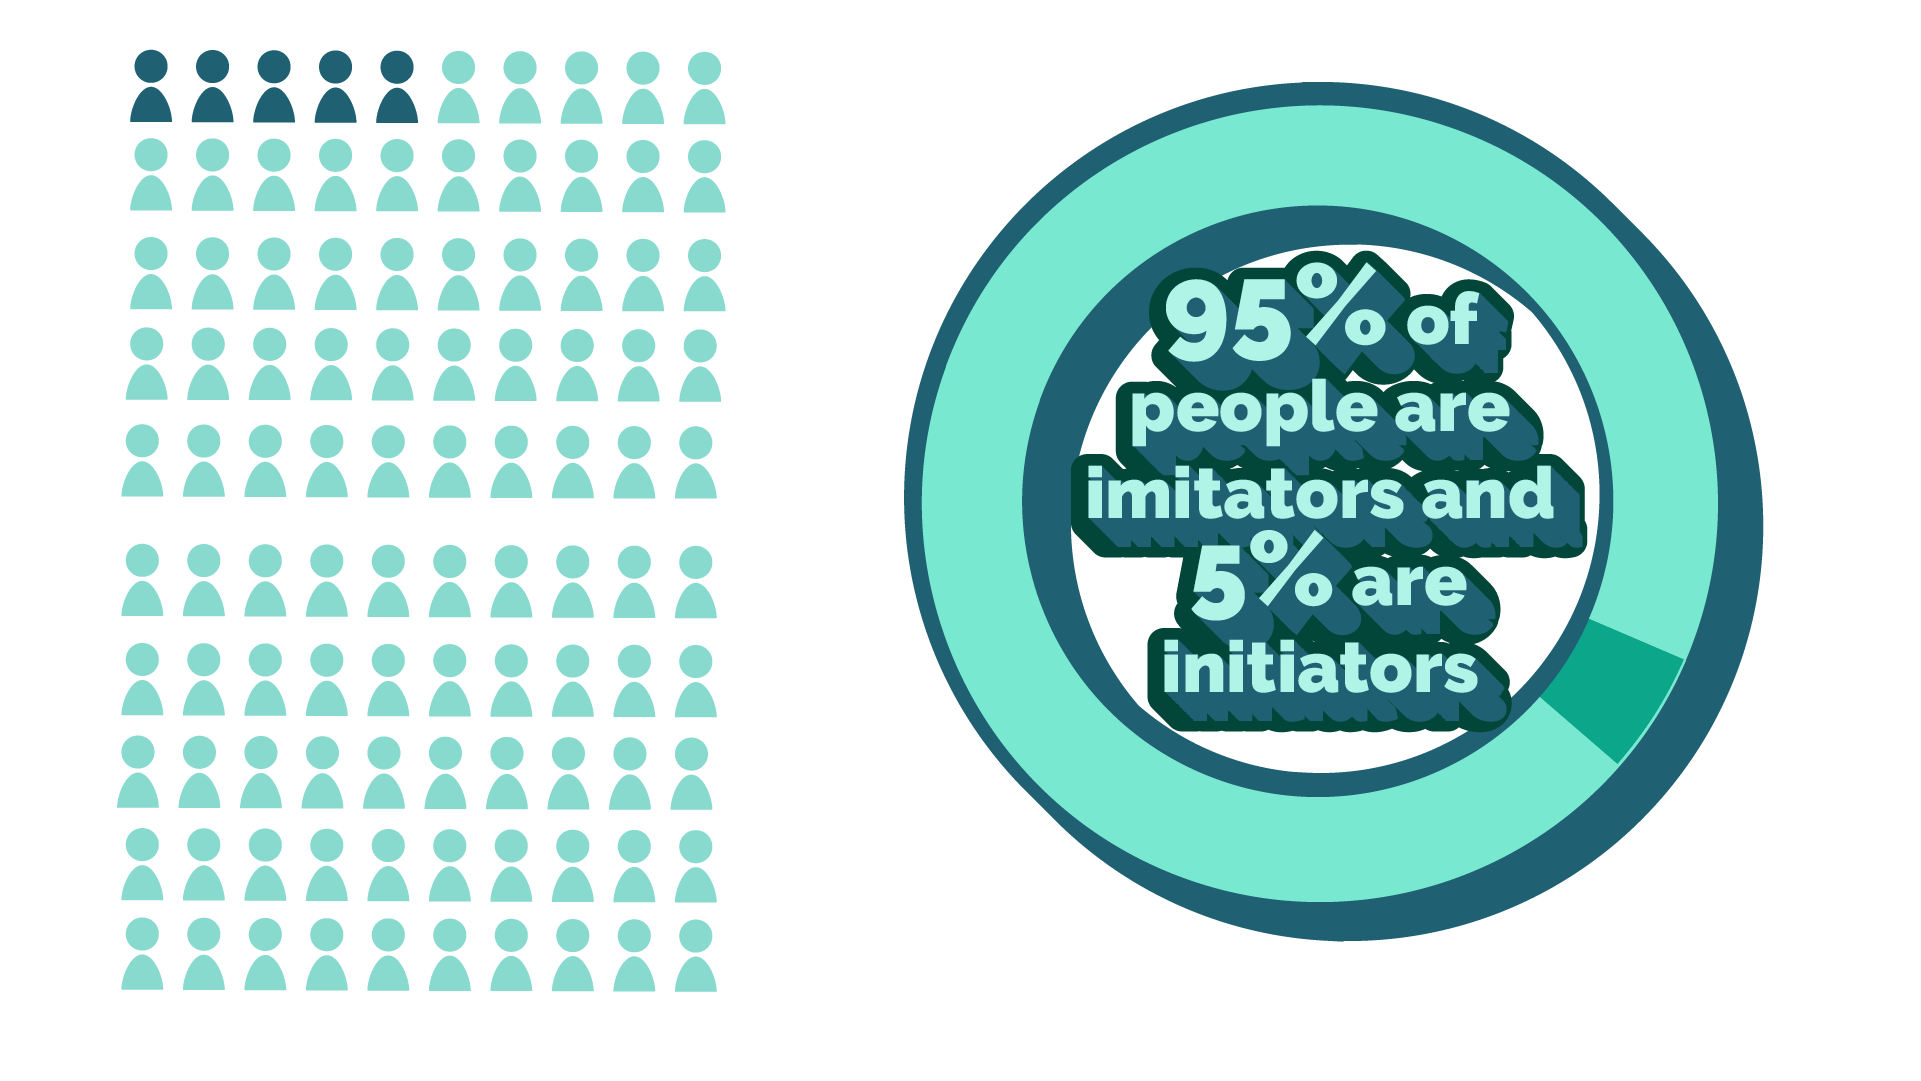 social proof theory Cialdini quote - that explains 95% of people are imitators and 5% are initiators